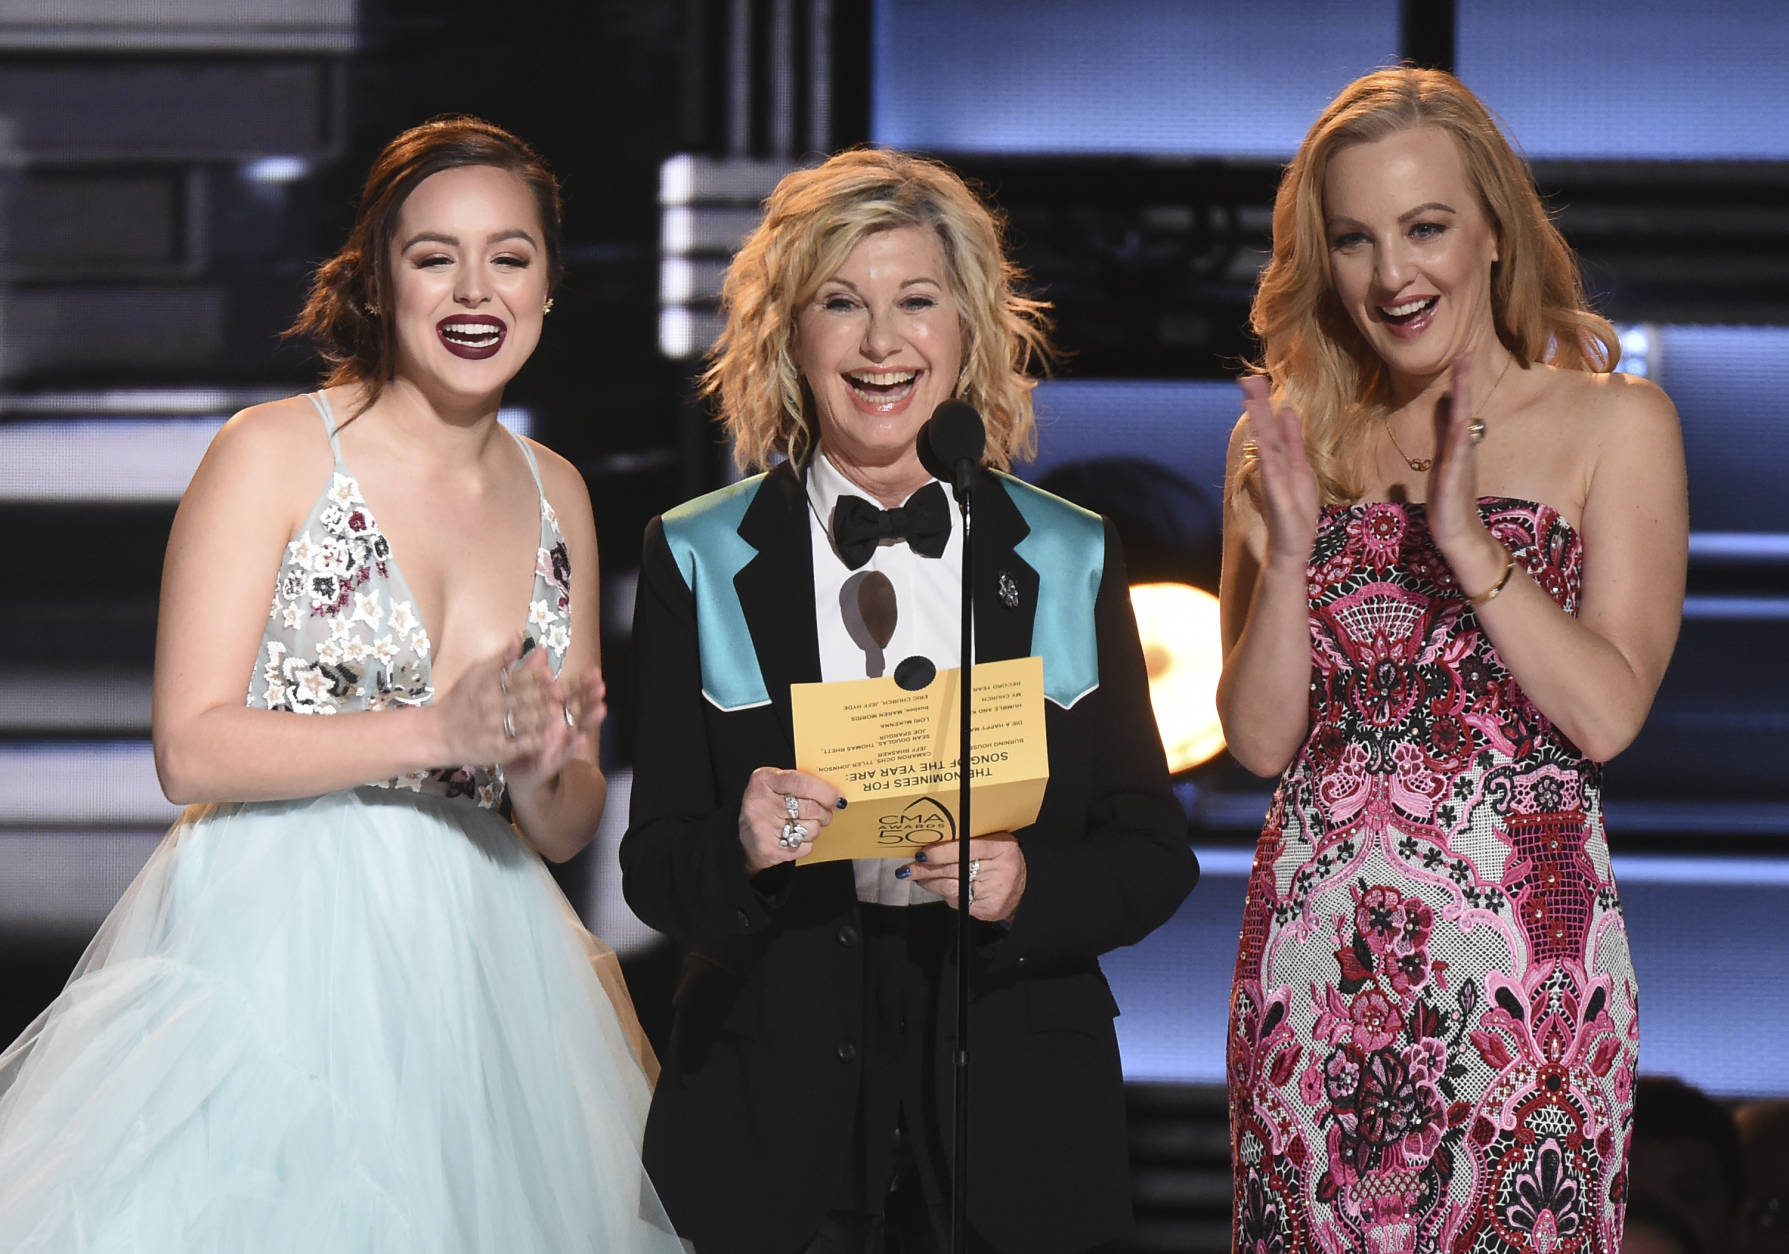 Hayley Orrantia, from left, Olivia Newton-John and Wendi McLendon-Covey and present the award for song of the year at the 50th annual CMA Awards at the Bridgestone Arena on Wednesday, Nov. 2, 2016, in Nashville, Tenn. (Photo by Charles Sykes/Invision/AP)